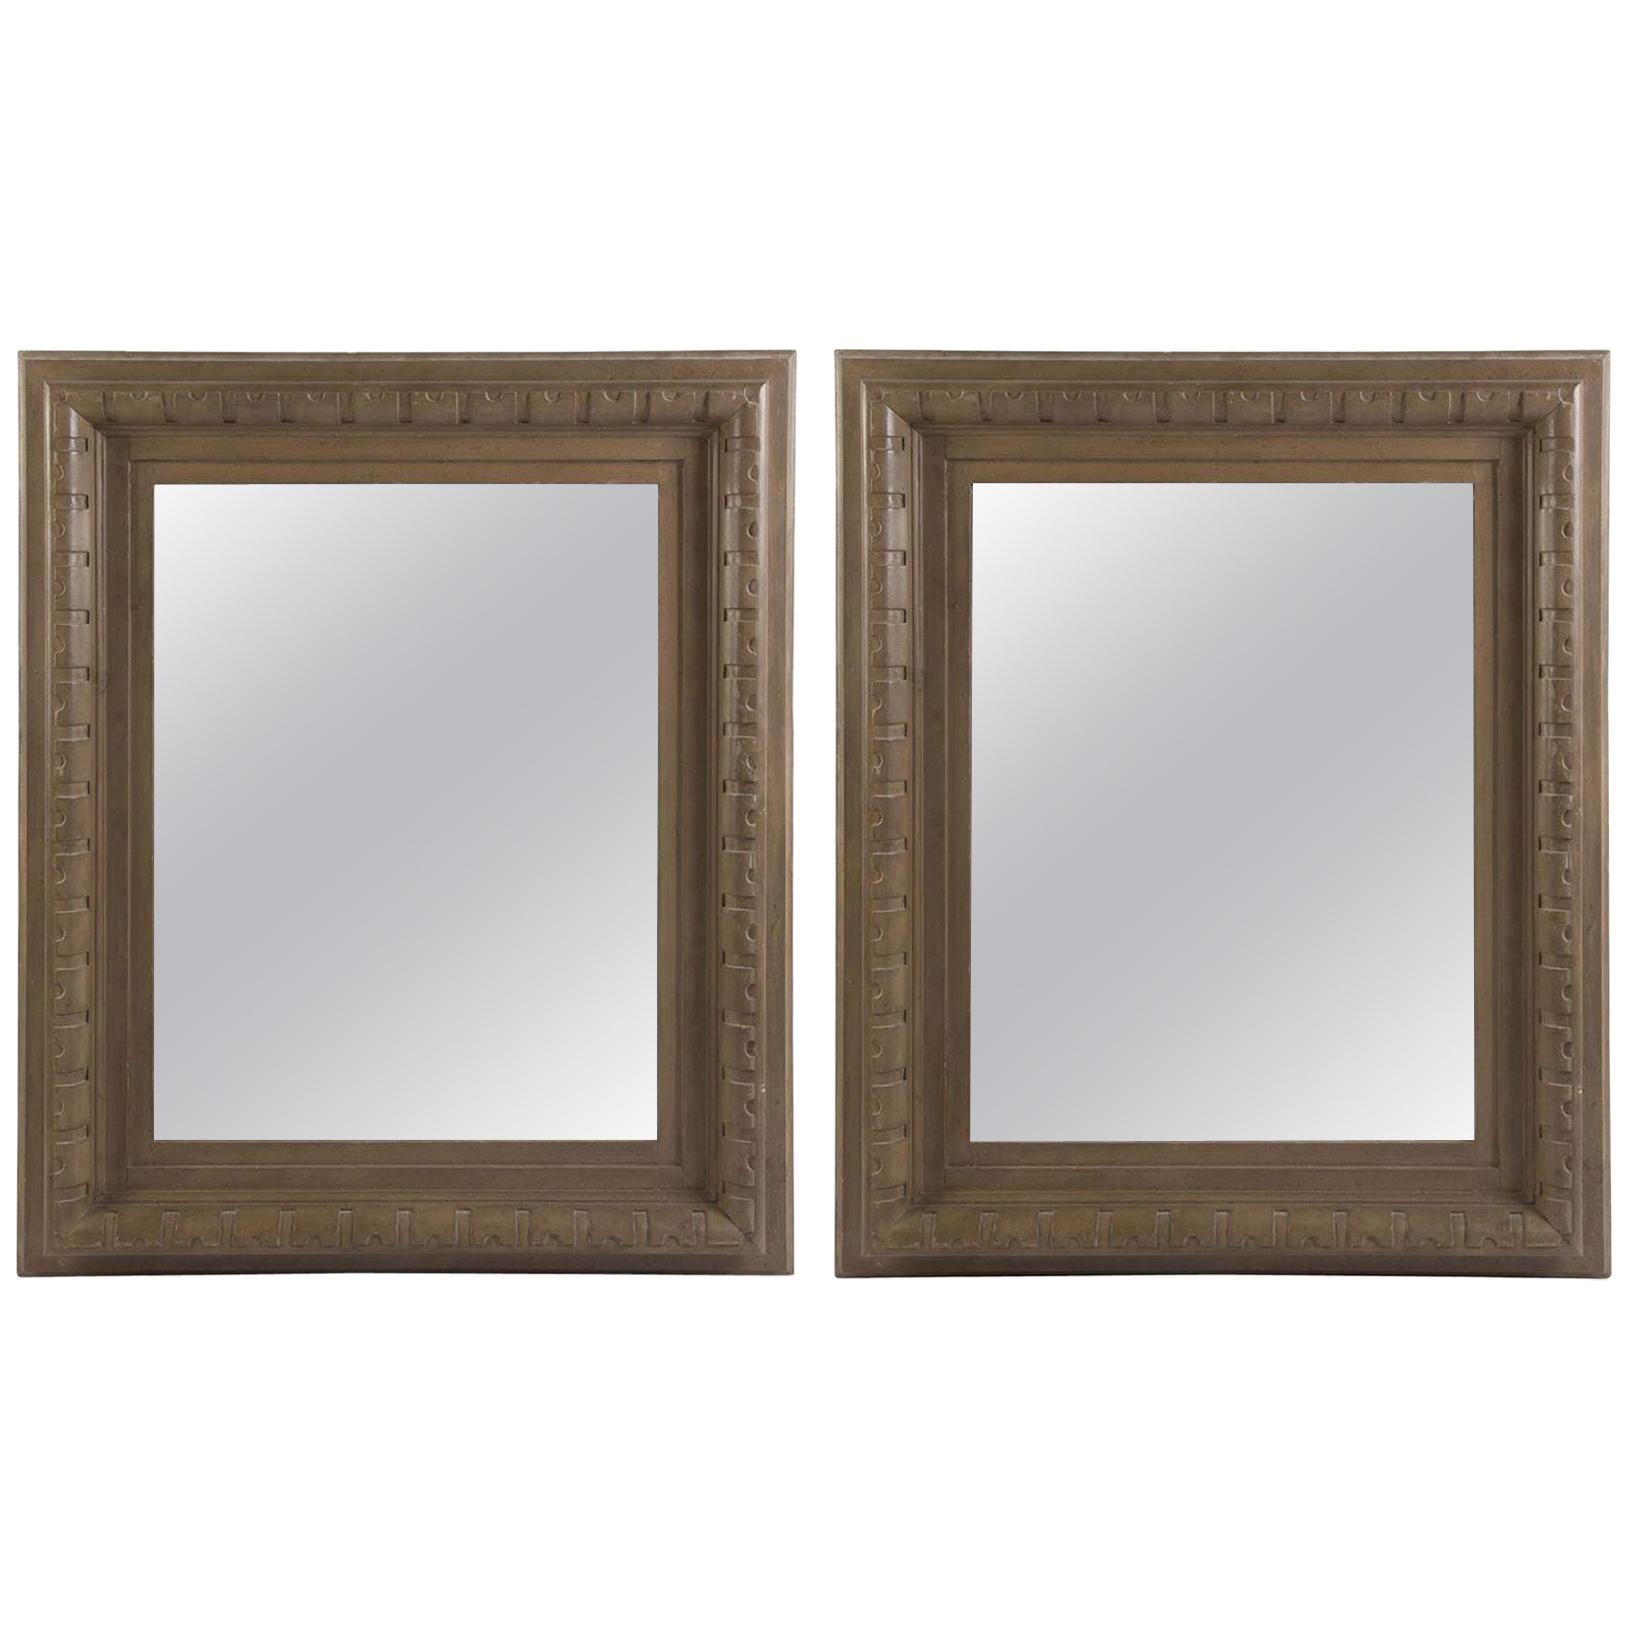 Pair of Large Architectural Wooden Framed Mirrors